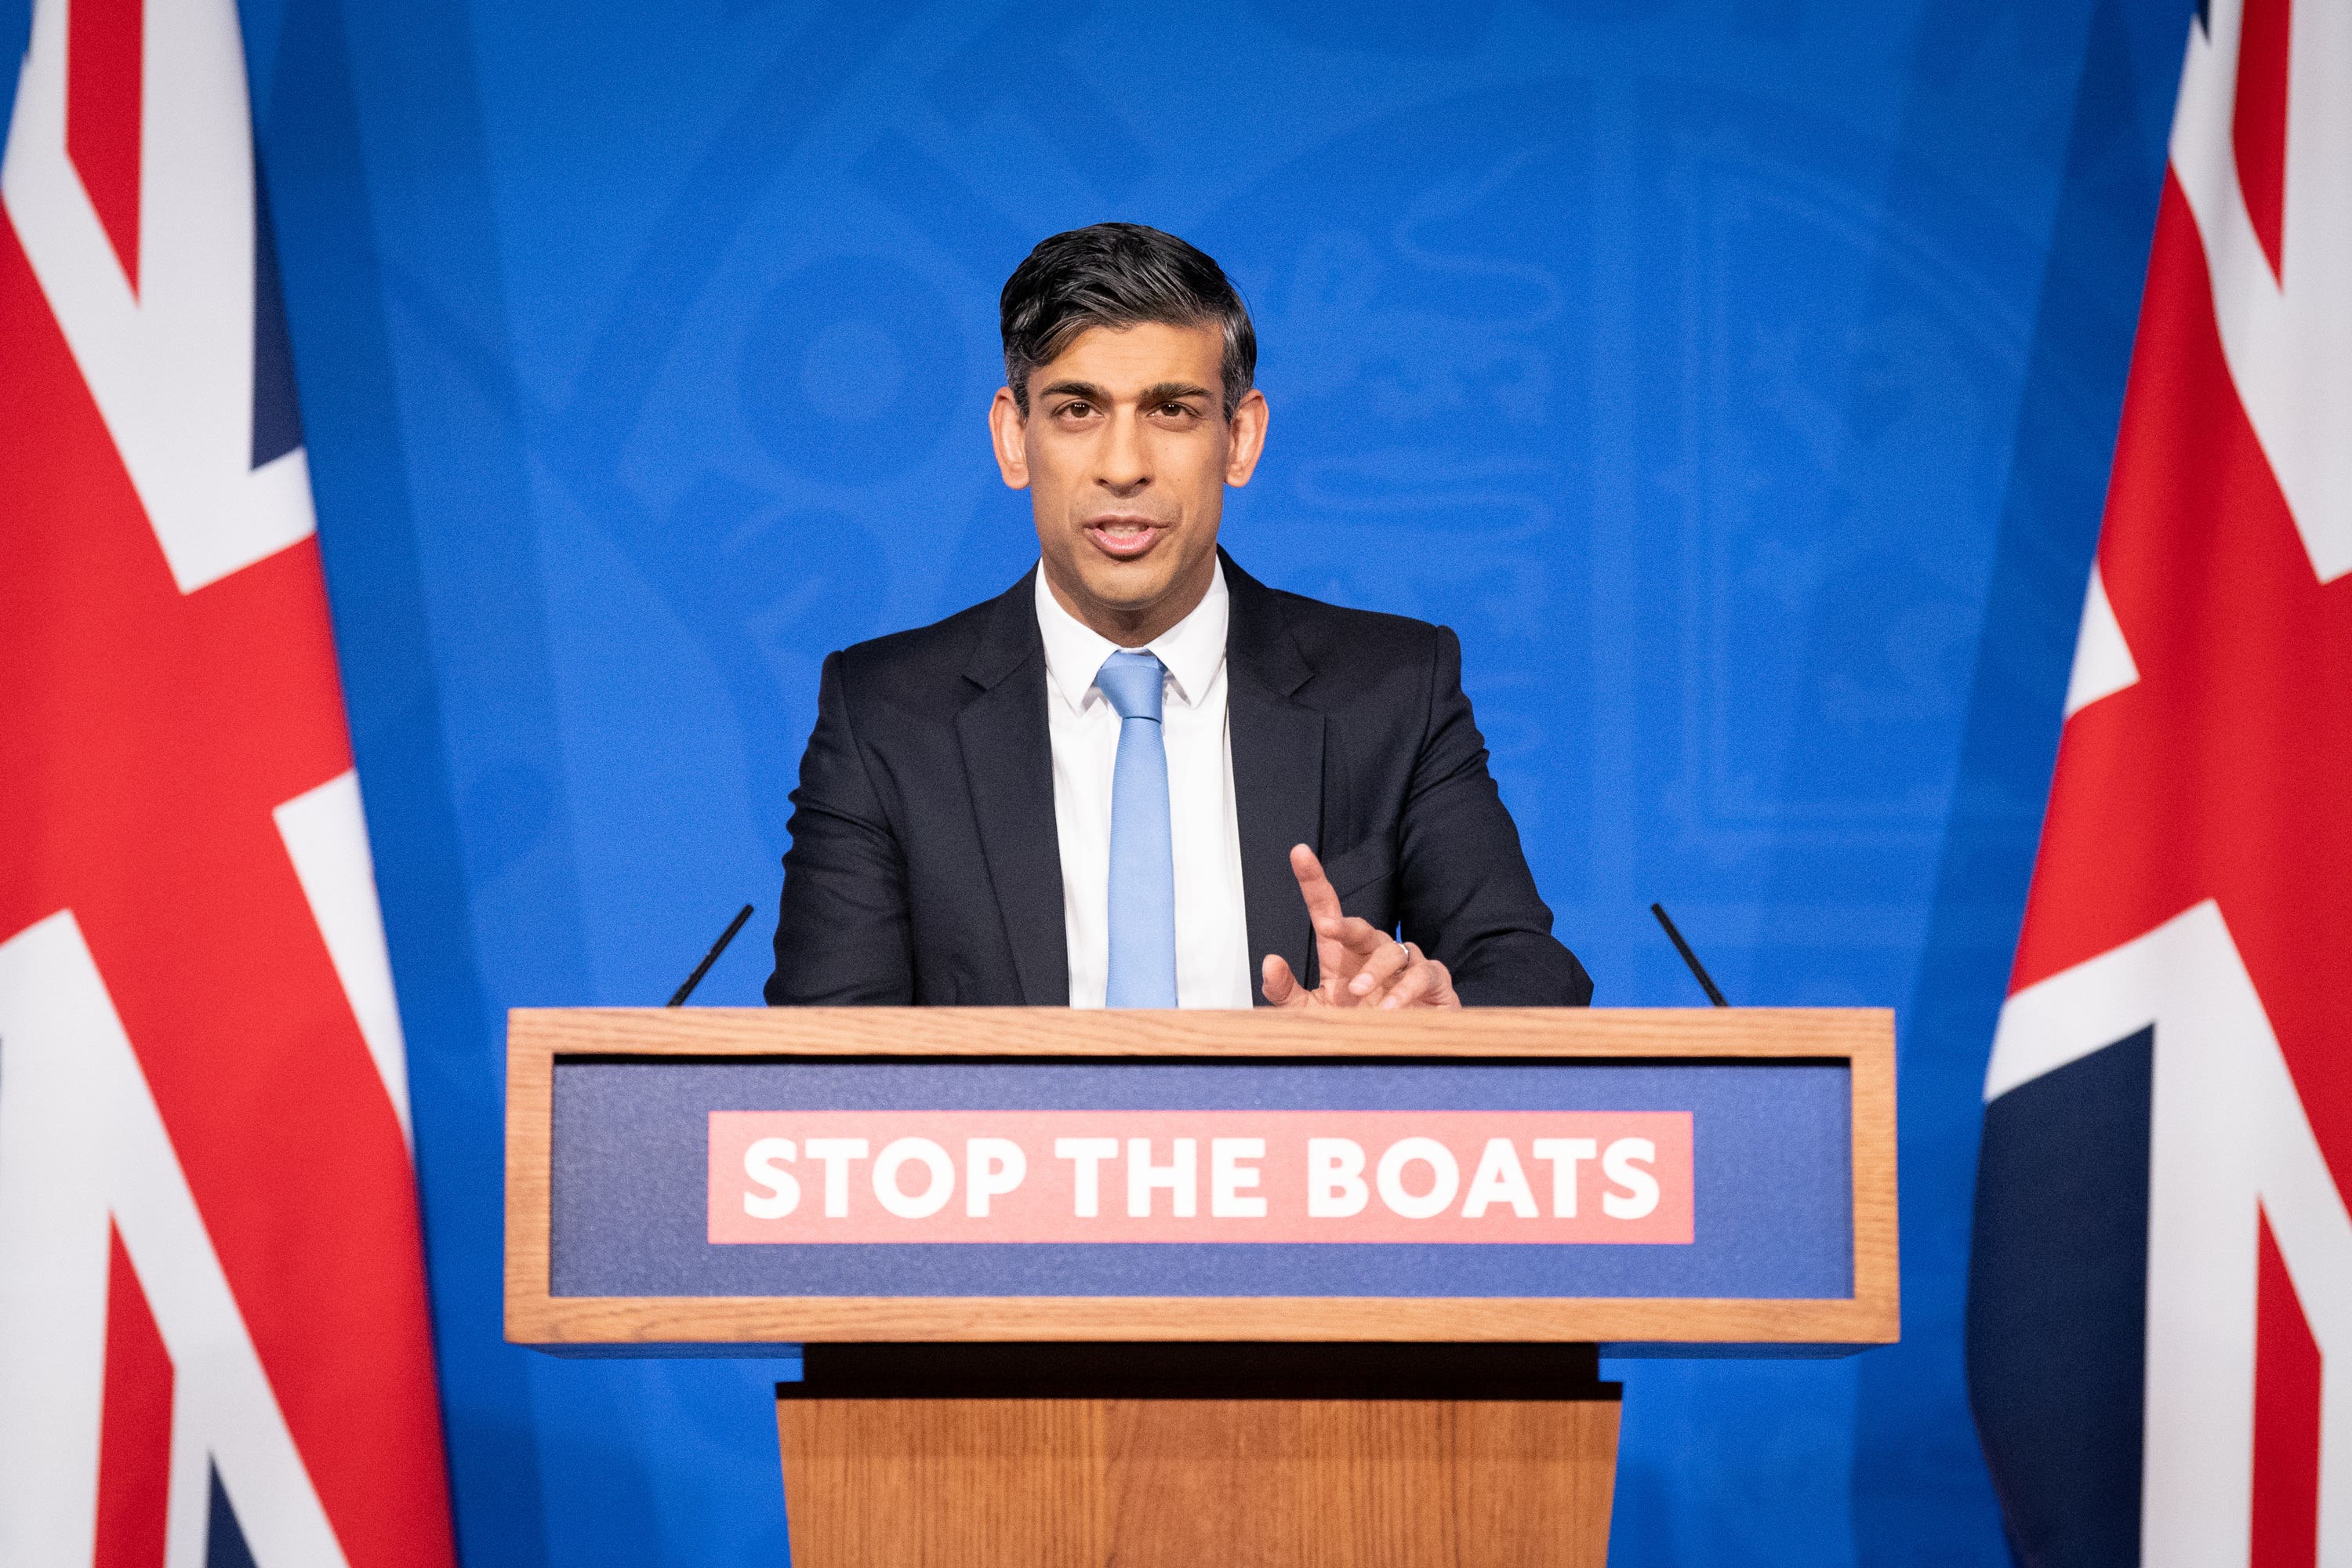 Sunak has made ‘stopping the boats’ one of the key pledges of his leadership